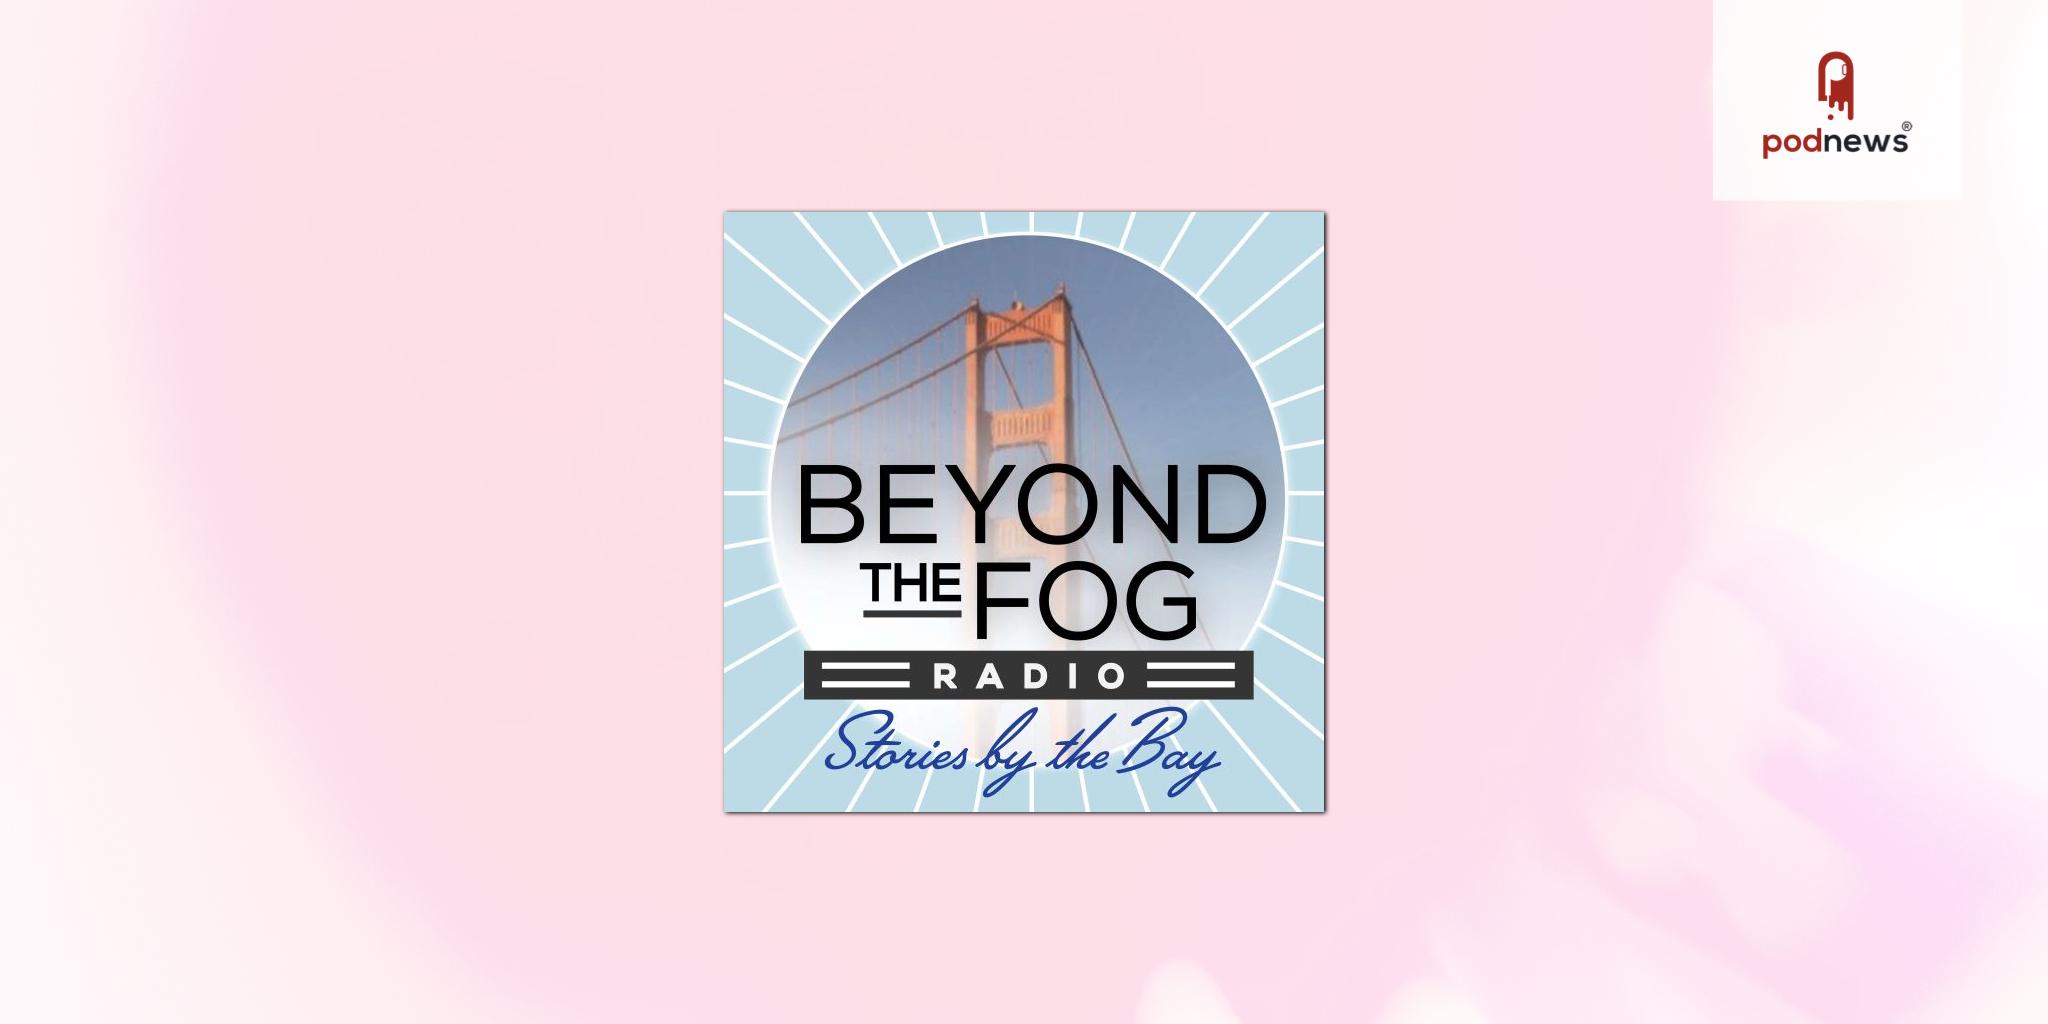 Beyond the Fog Radio Partners with San Francisco Magazine To Tell The Stories of Renowned San Franciscans